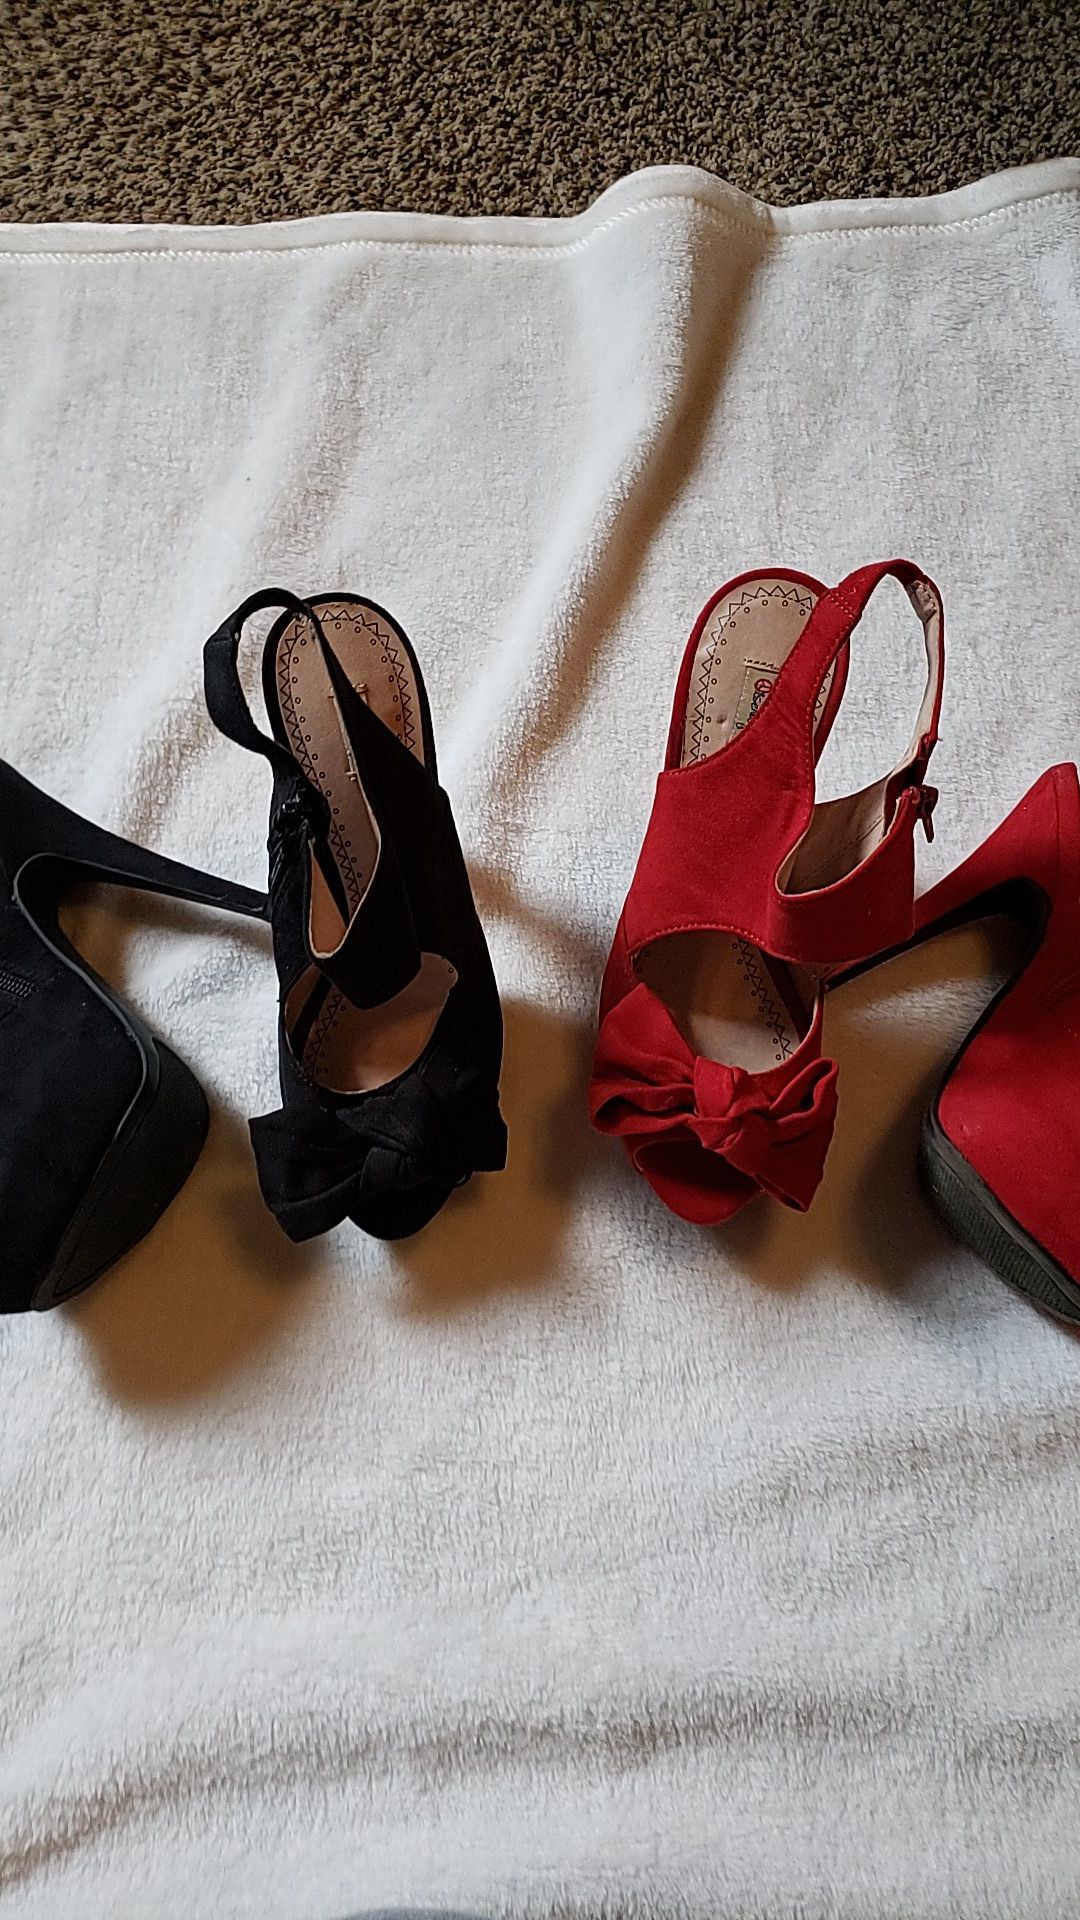 Heels size 6 black and red